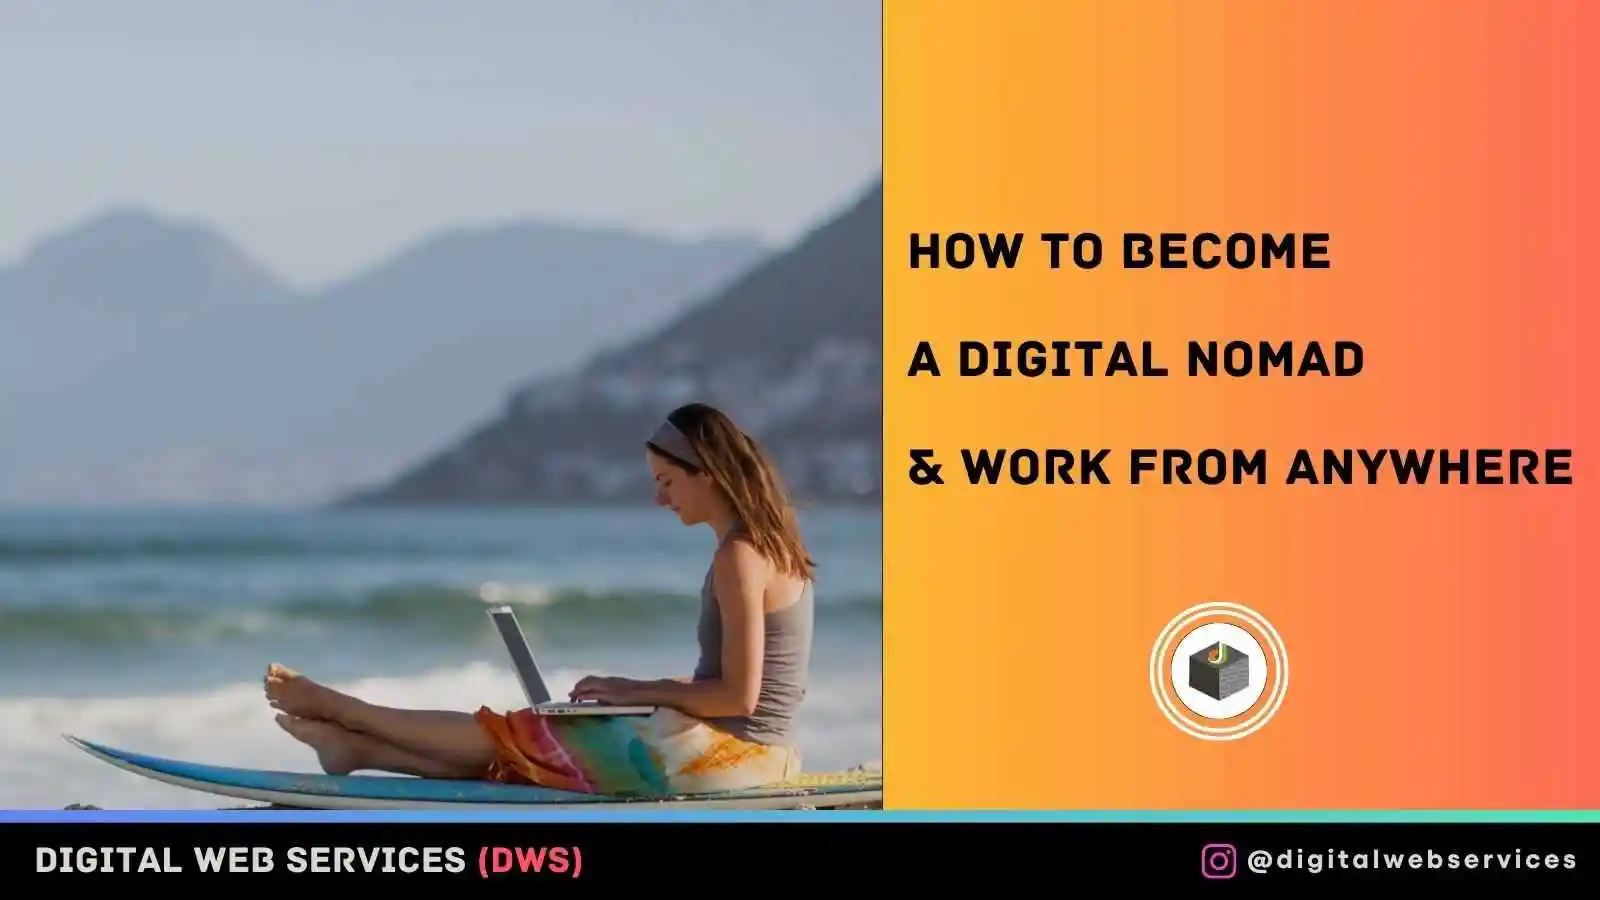 How To Become A Digital Nomad & Work From Anywhere